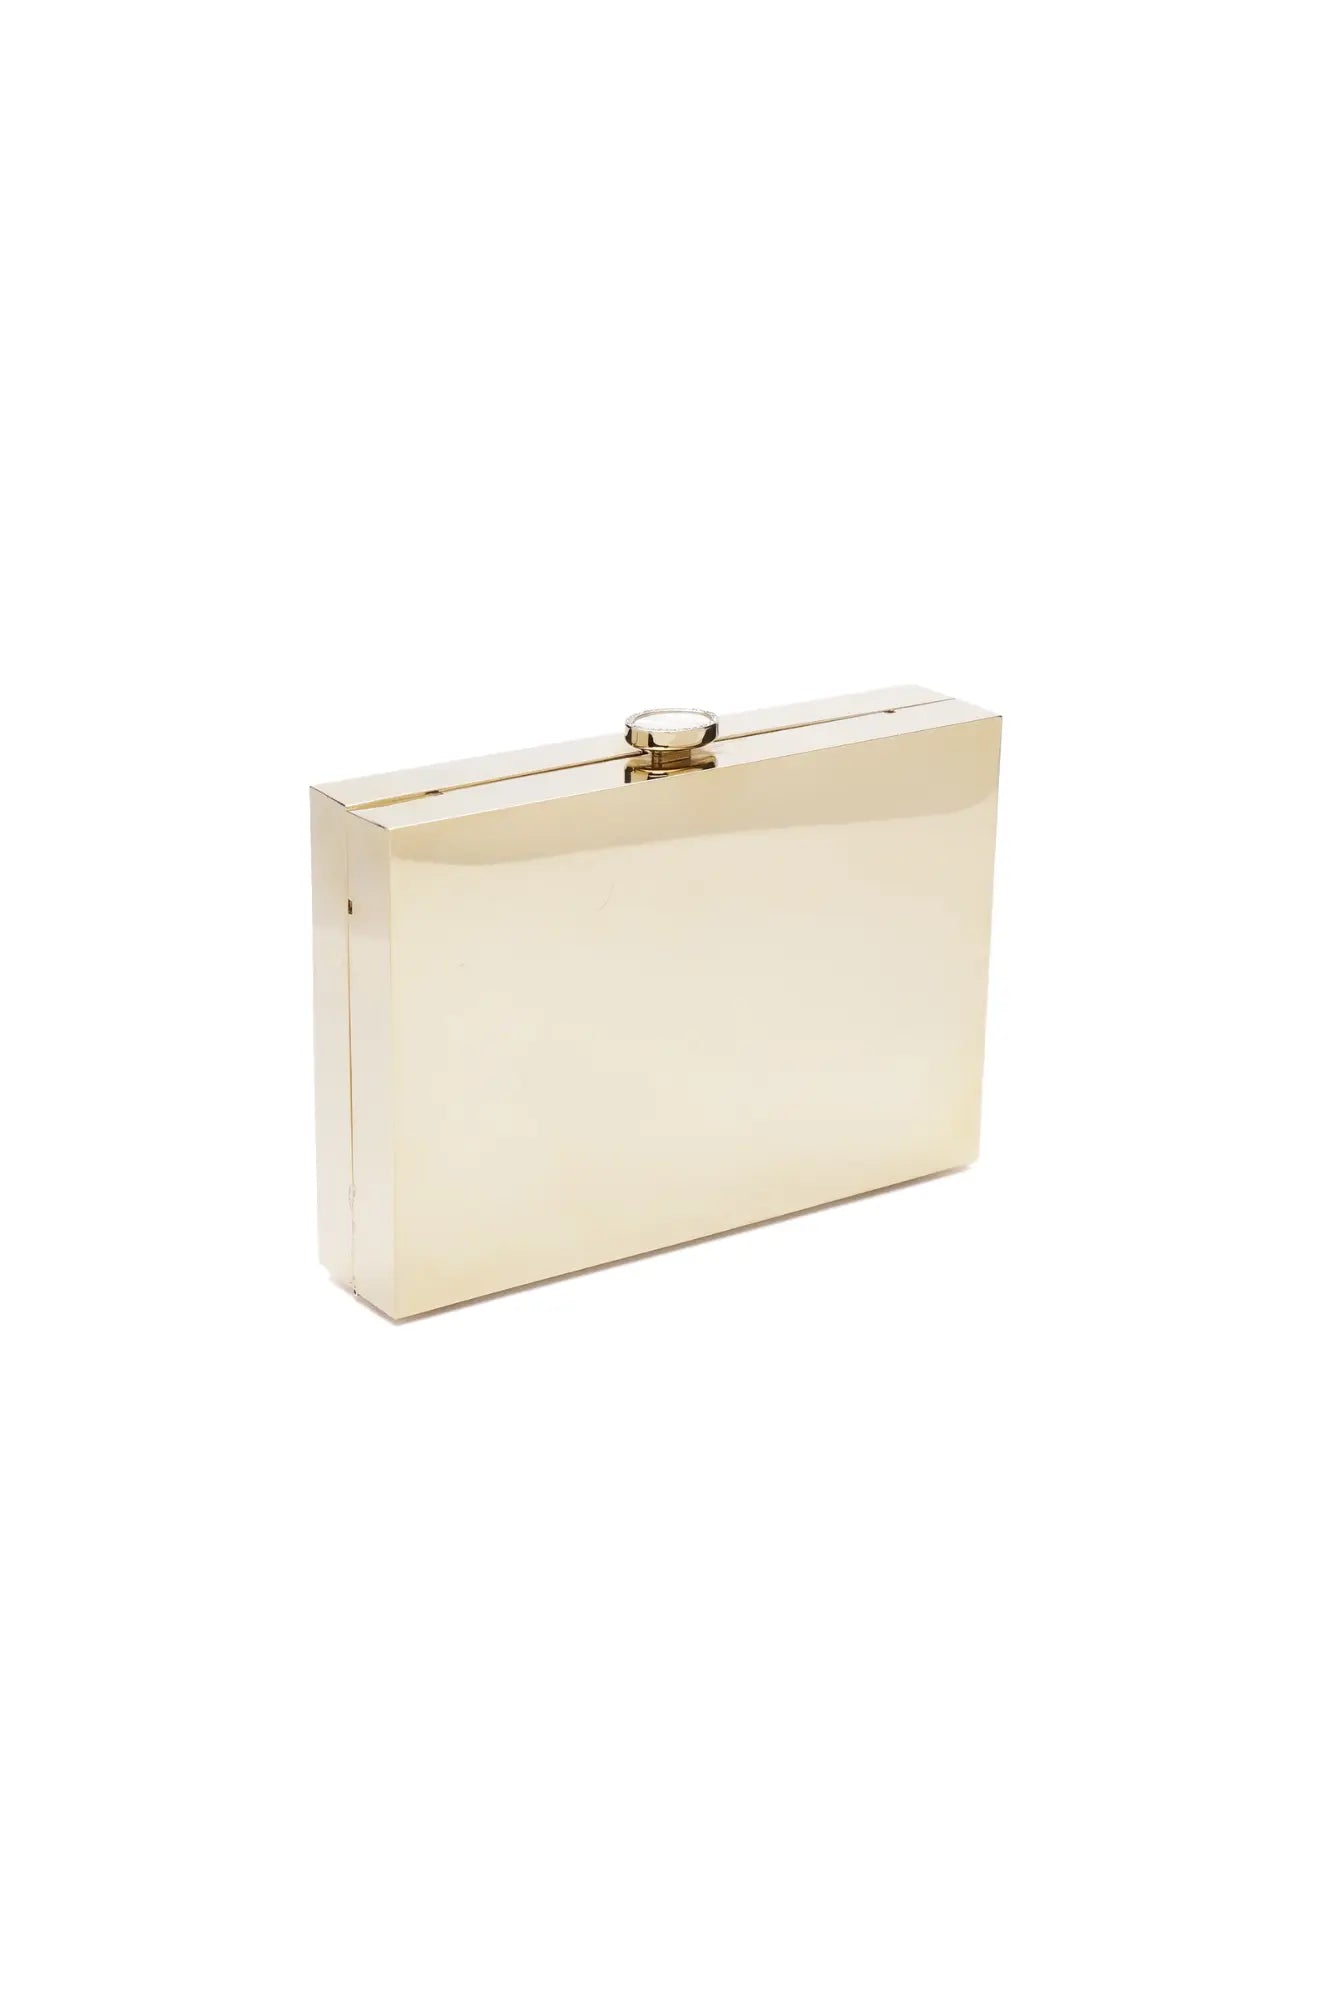 A Ella Clutch - Mirror Gold purse in a geometric silhouette on a white background by The Bella Rosa Collection.